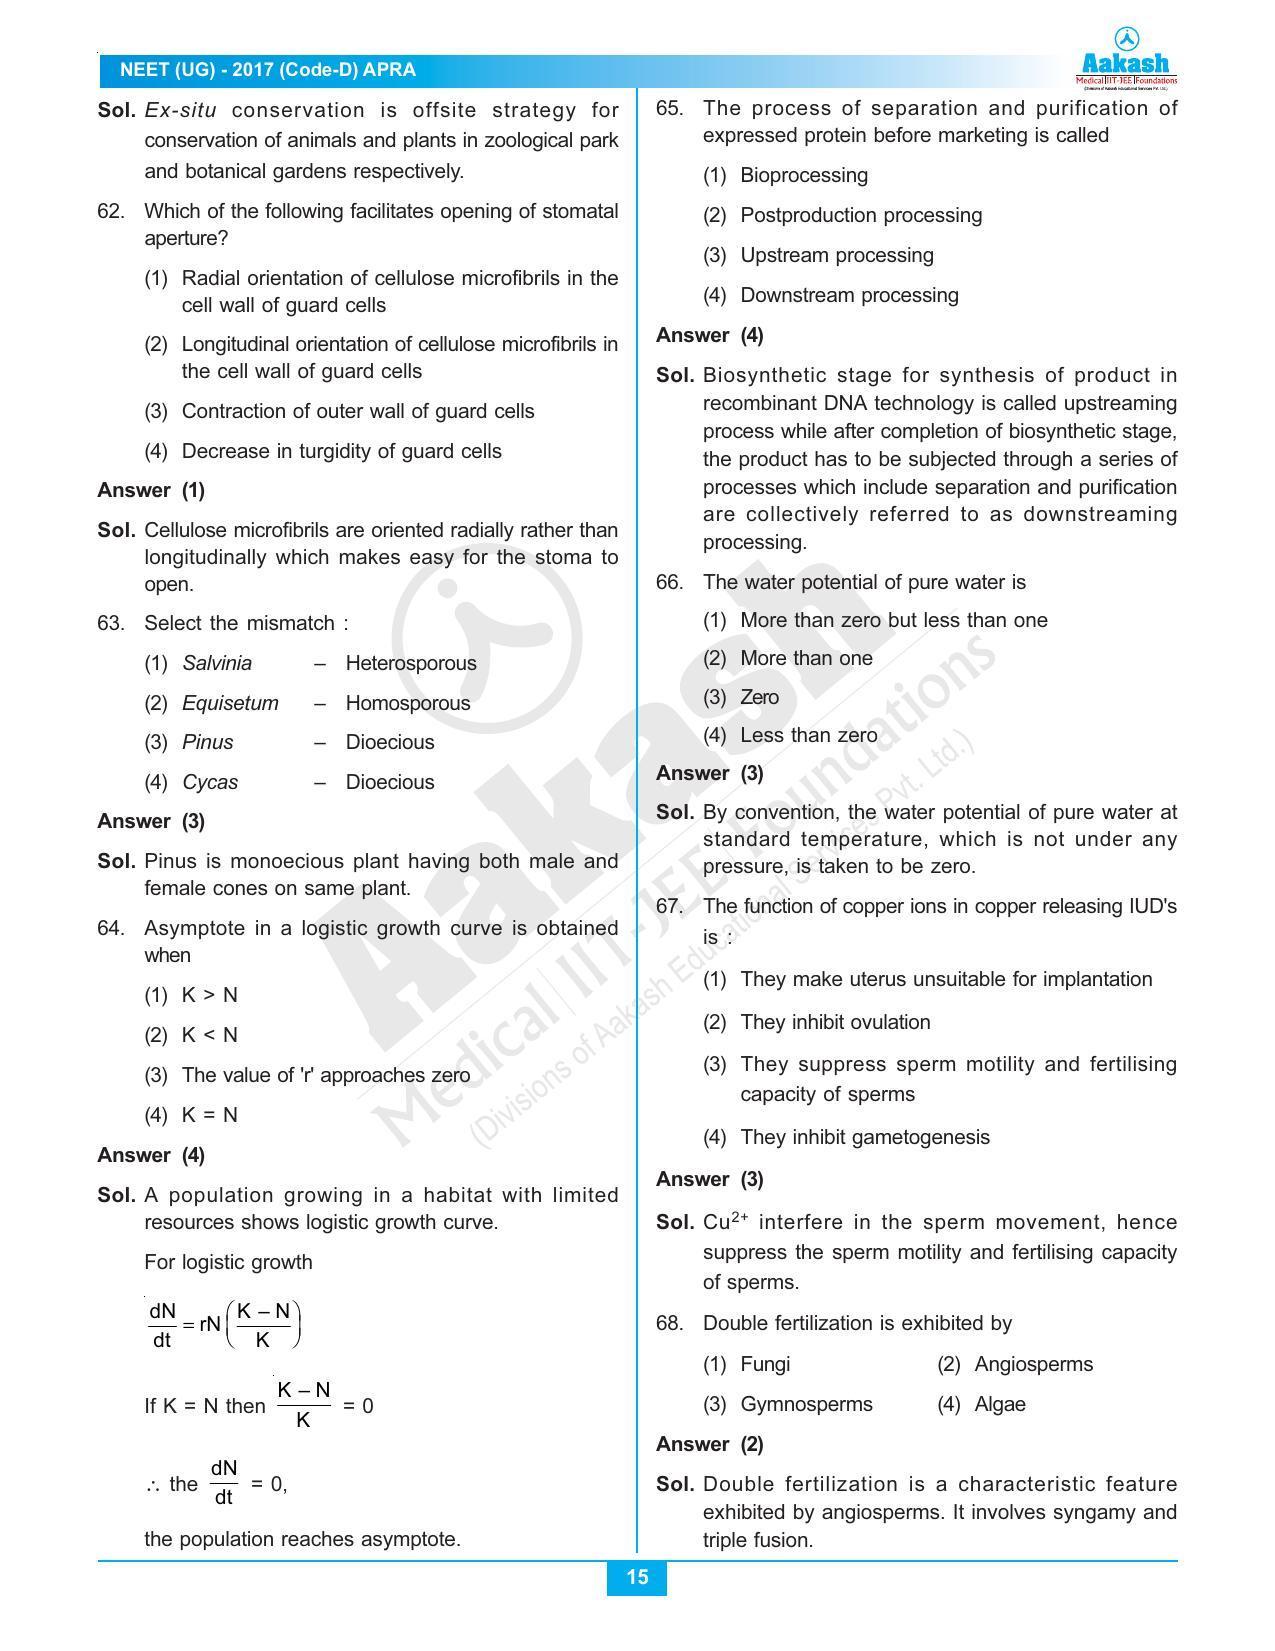  NEET Code D 2017 Answer & Solutions - Page 15